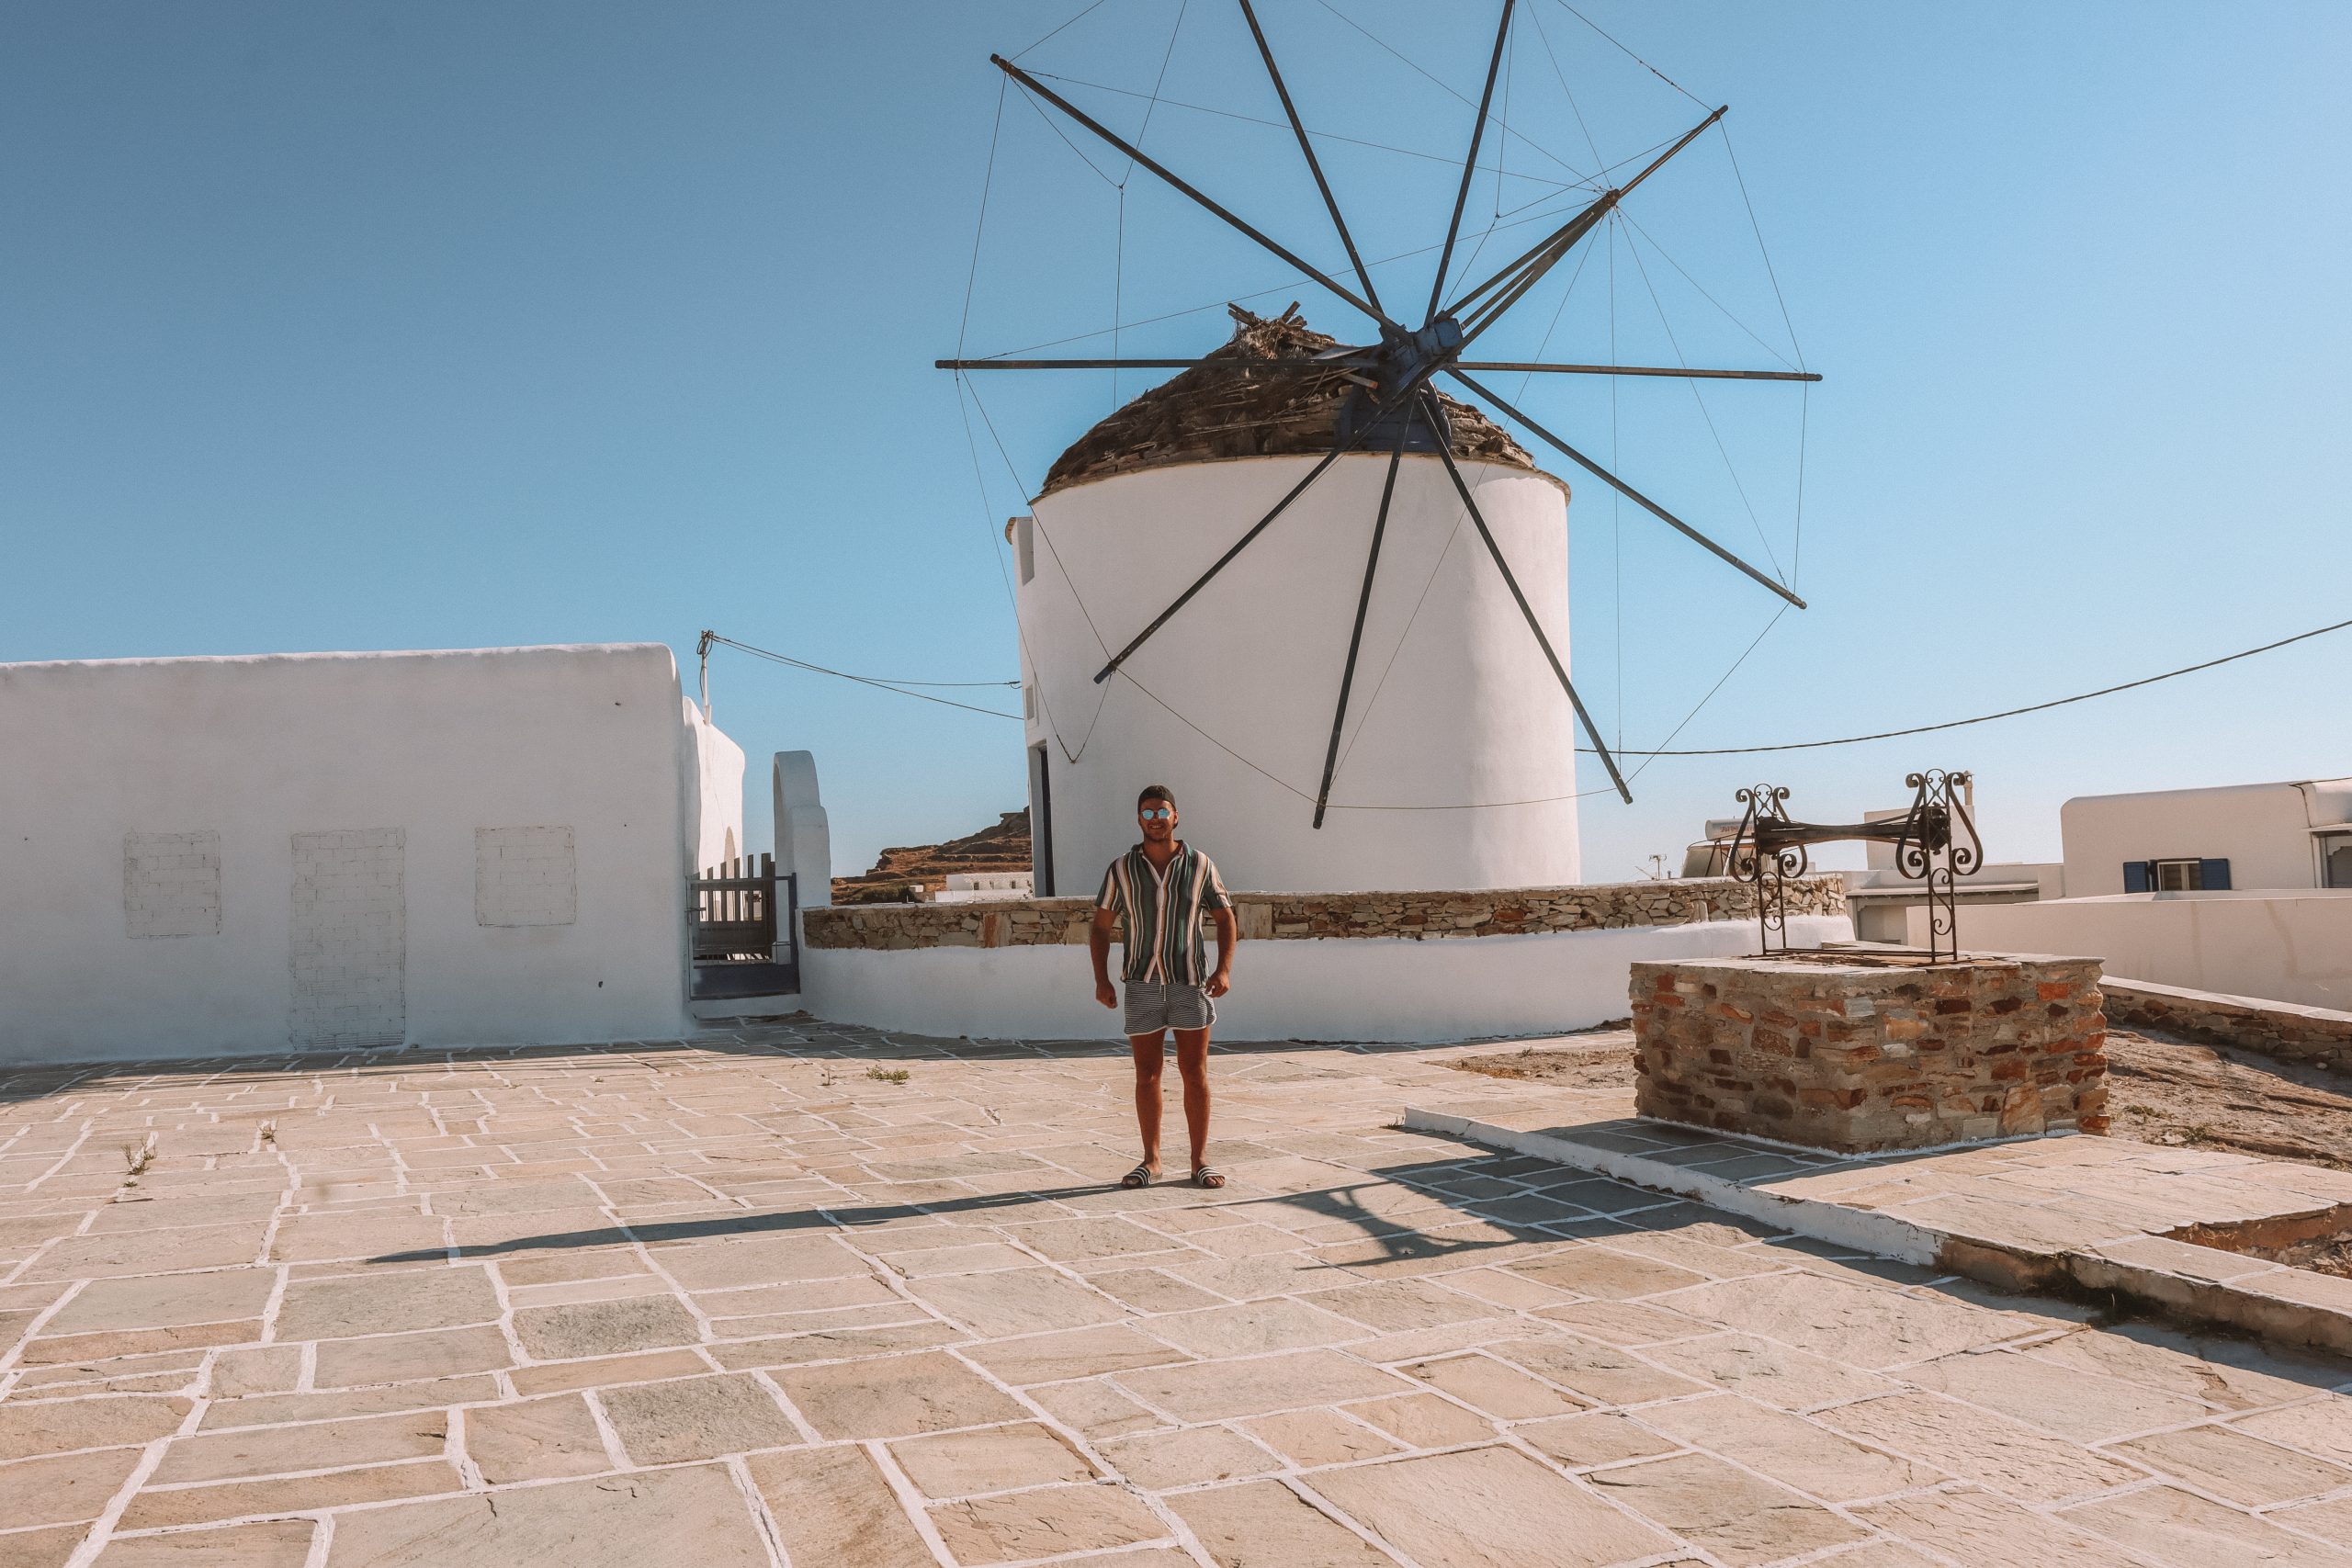 A man carrying invisible carpets in front of a windmill in Ios